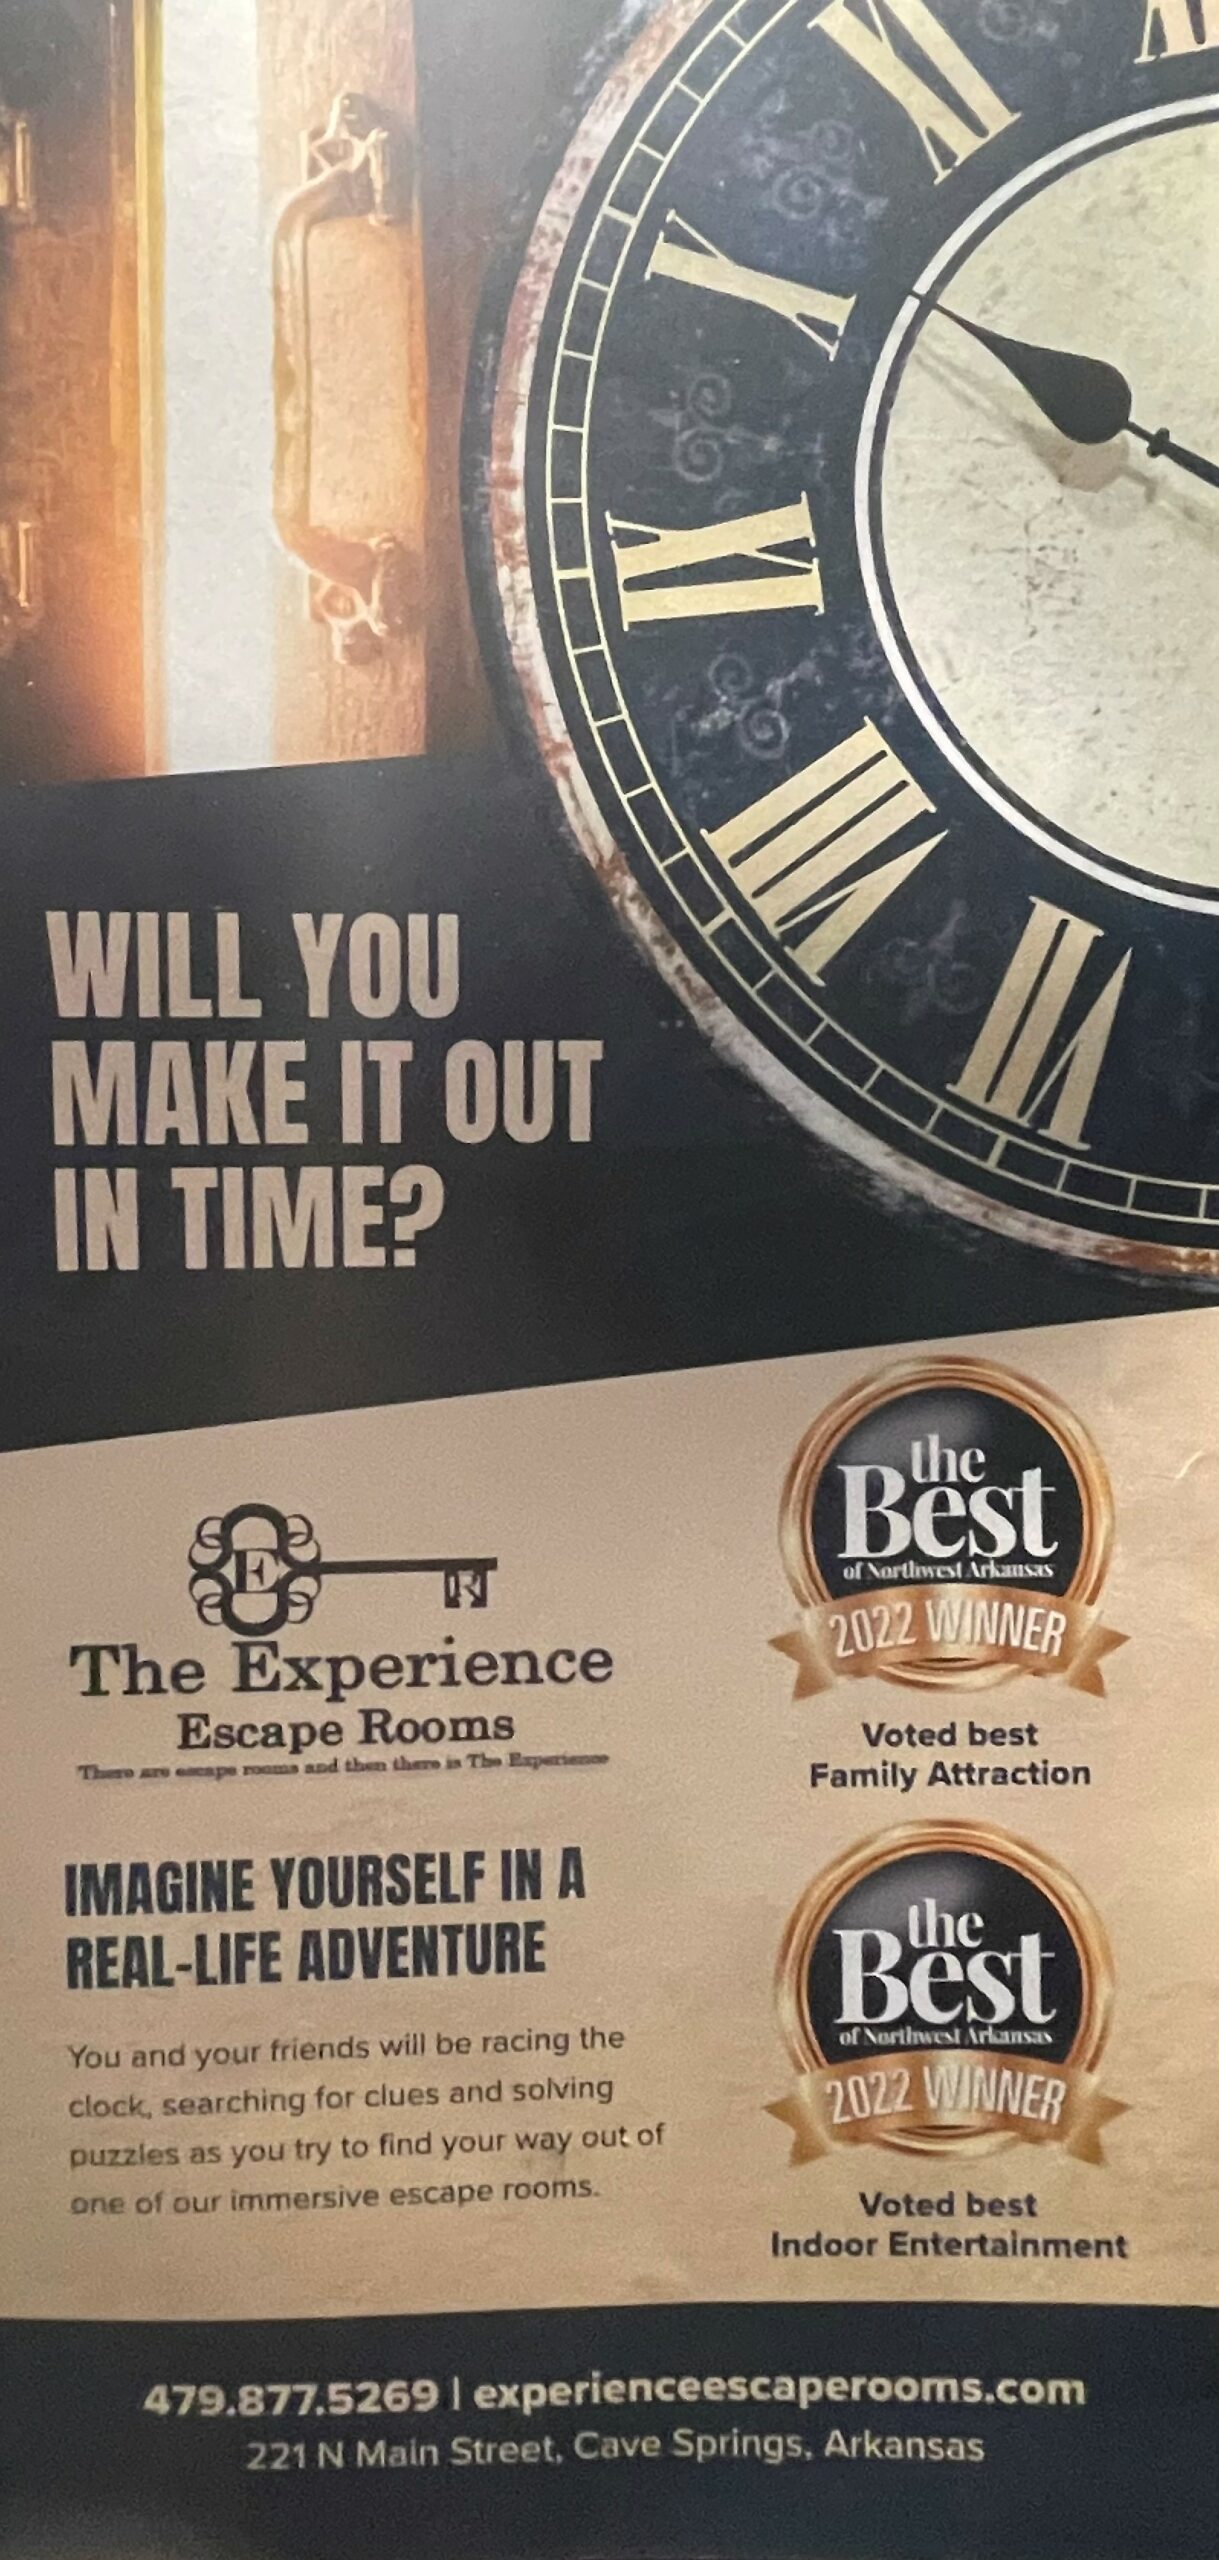 Award for Experience Escape Room "best family attraction" and "best indoor entertainment"